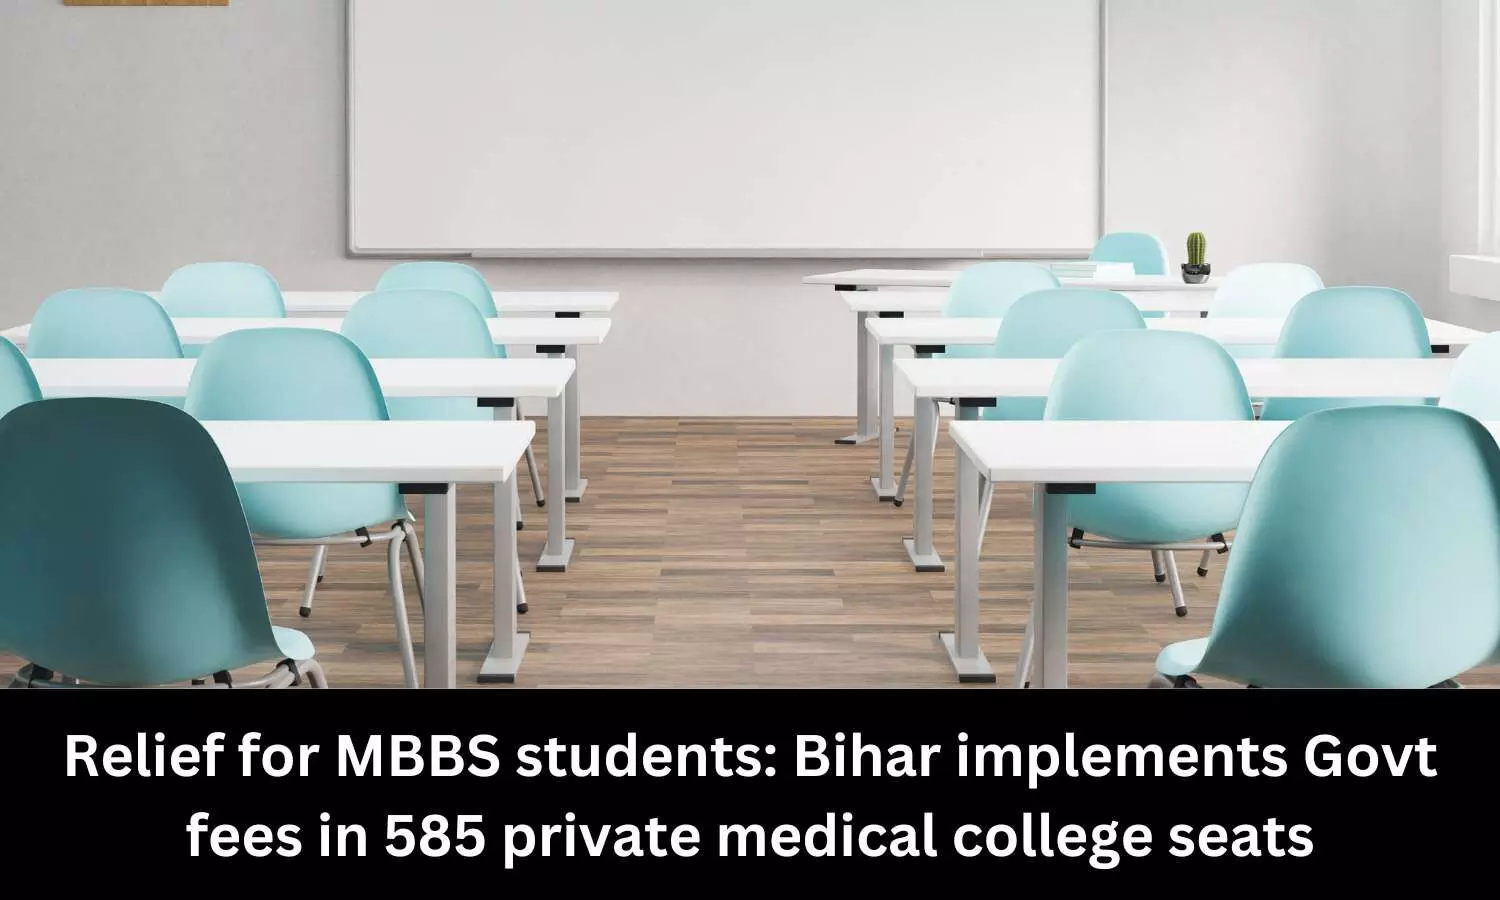 Relief for MBBS students: Bihar implements Govt fees in 585 private medical college seats